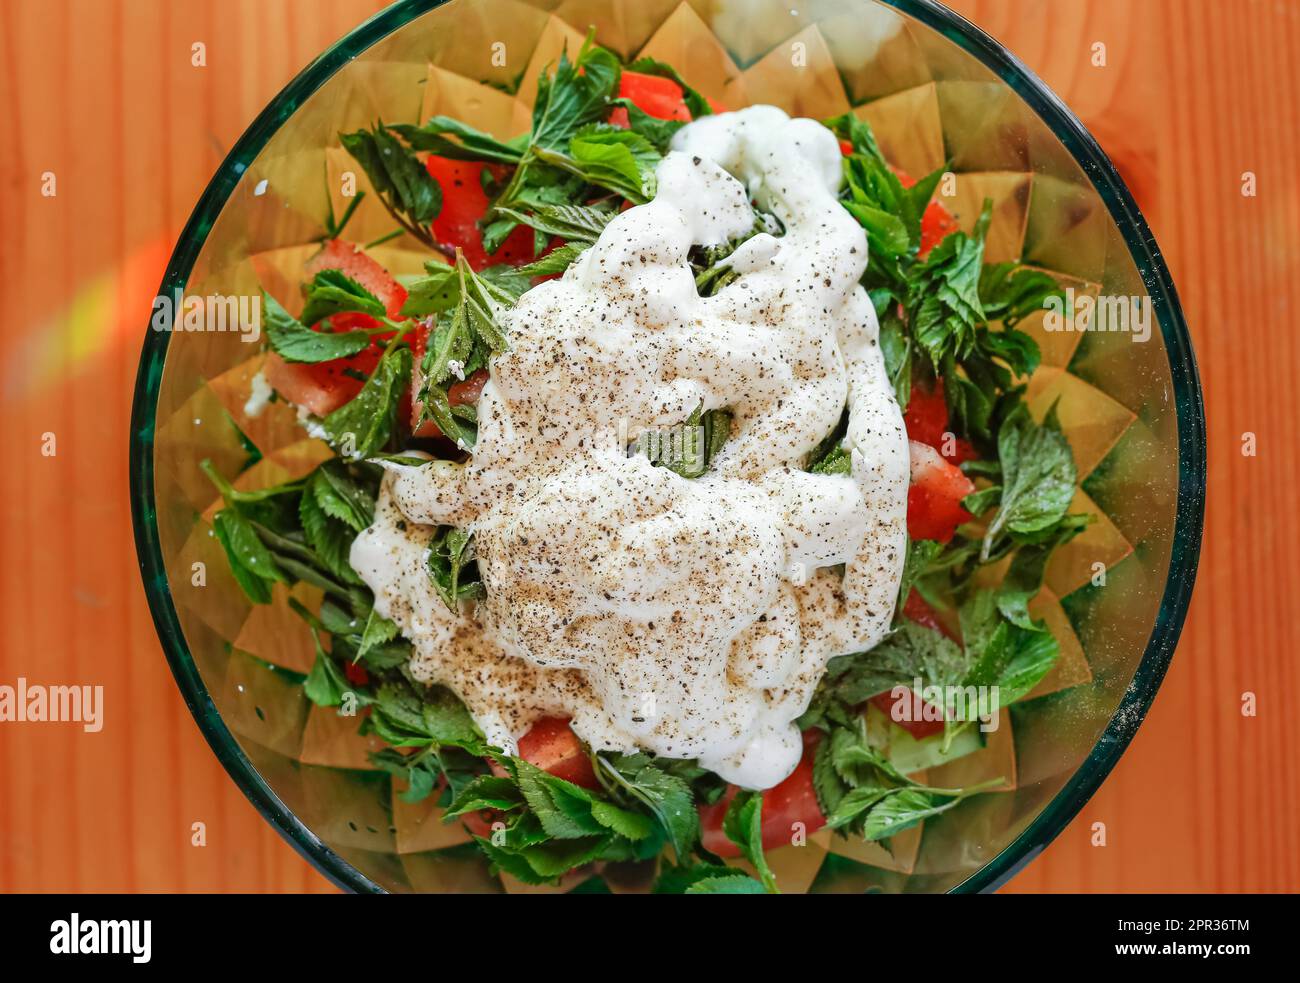 Fresh bowl of salad made with fresh Aegopodium podagraria commonly called ground elder, herb gerard, bishop's weed, gout wort leaves, tomato, cucumber Stock Photo